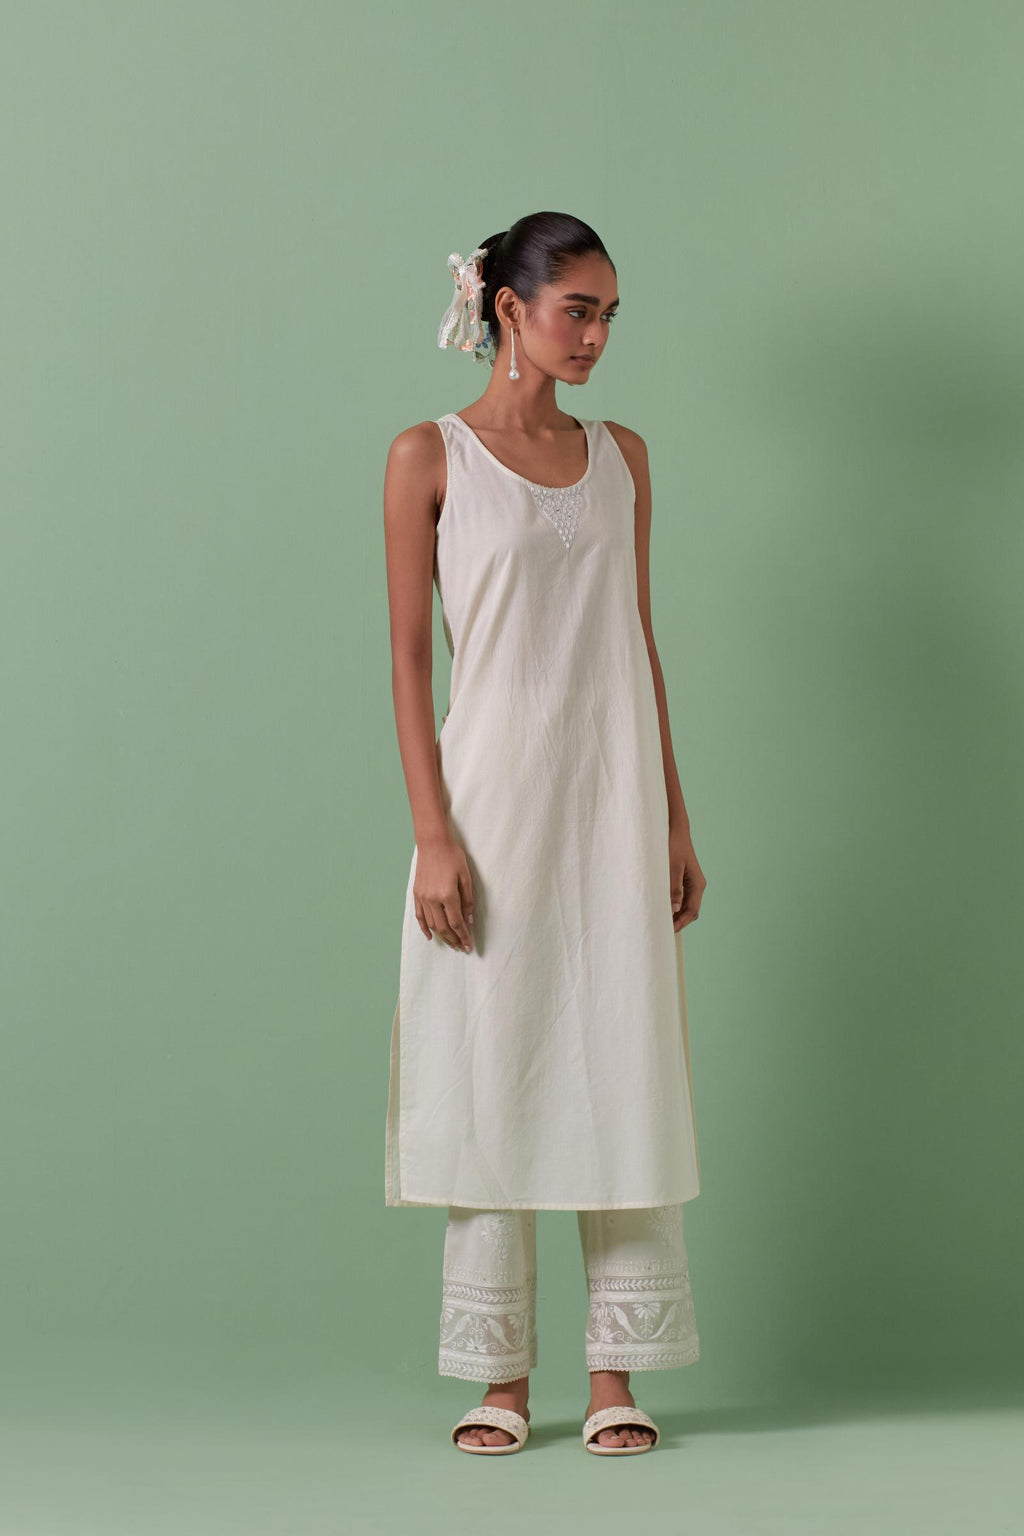 Off-white cotton chanderi embroidered kurta set dress with V neck, yoke and fine gathers at empire line.